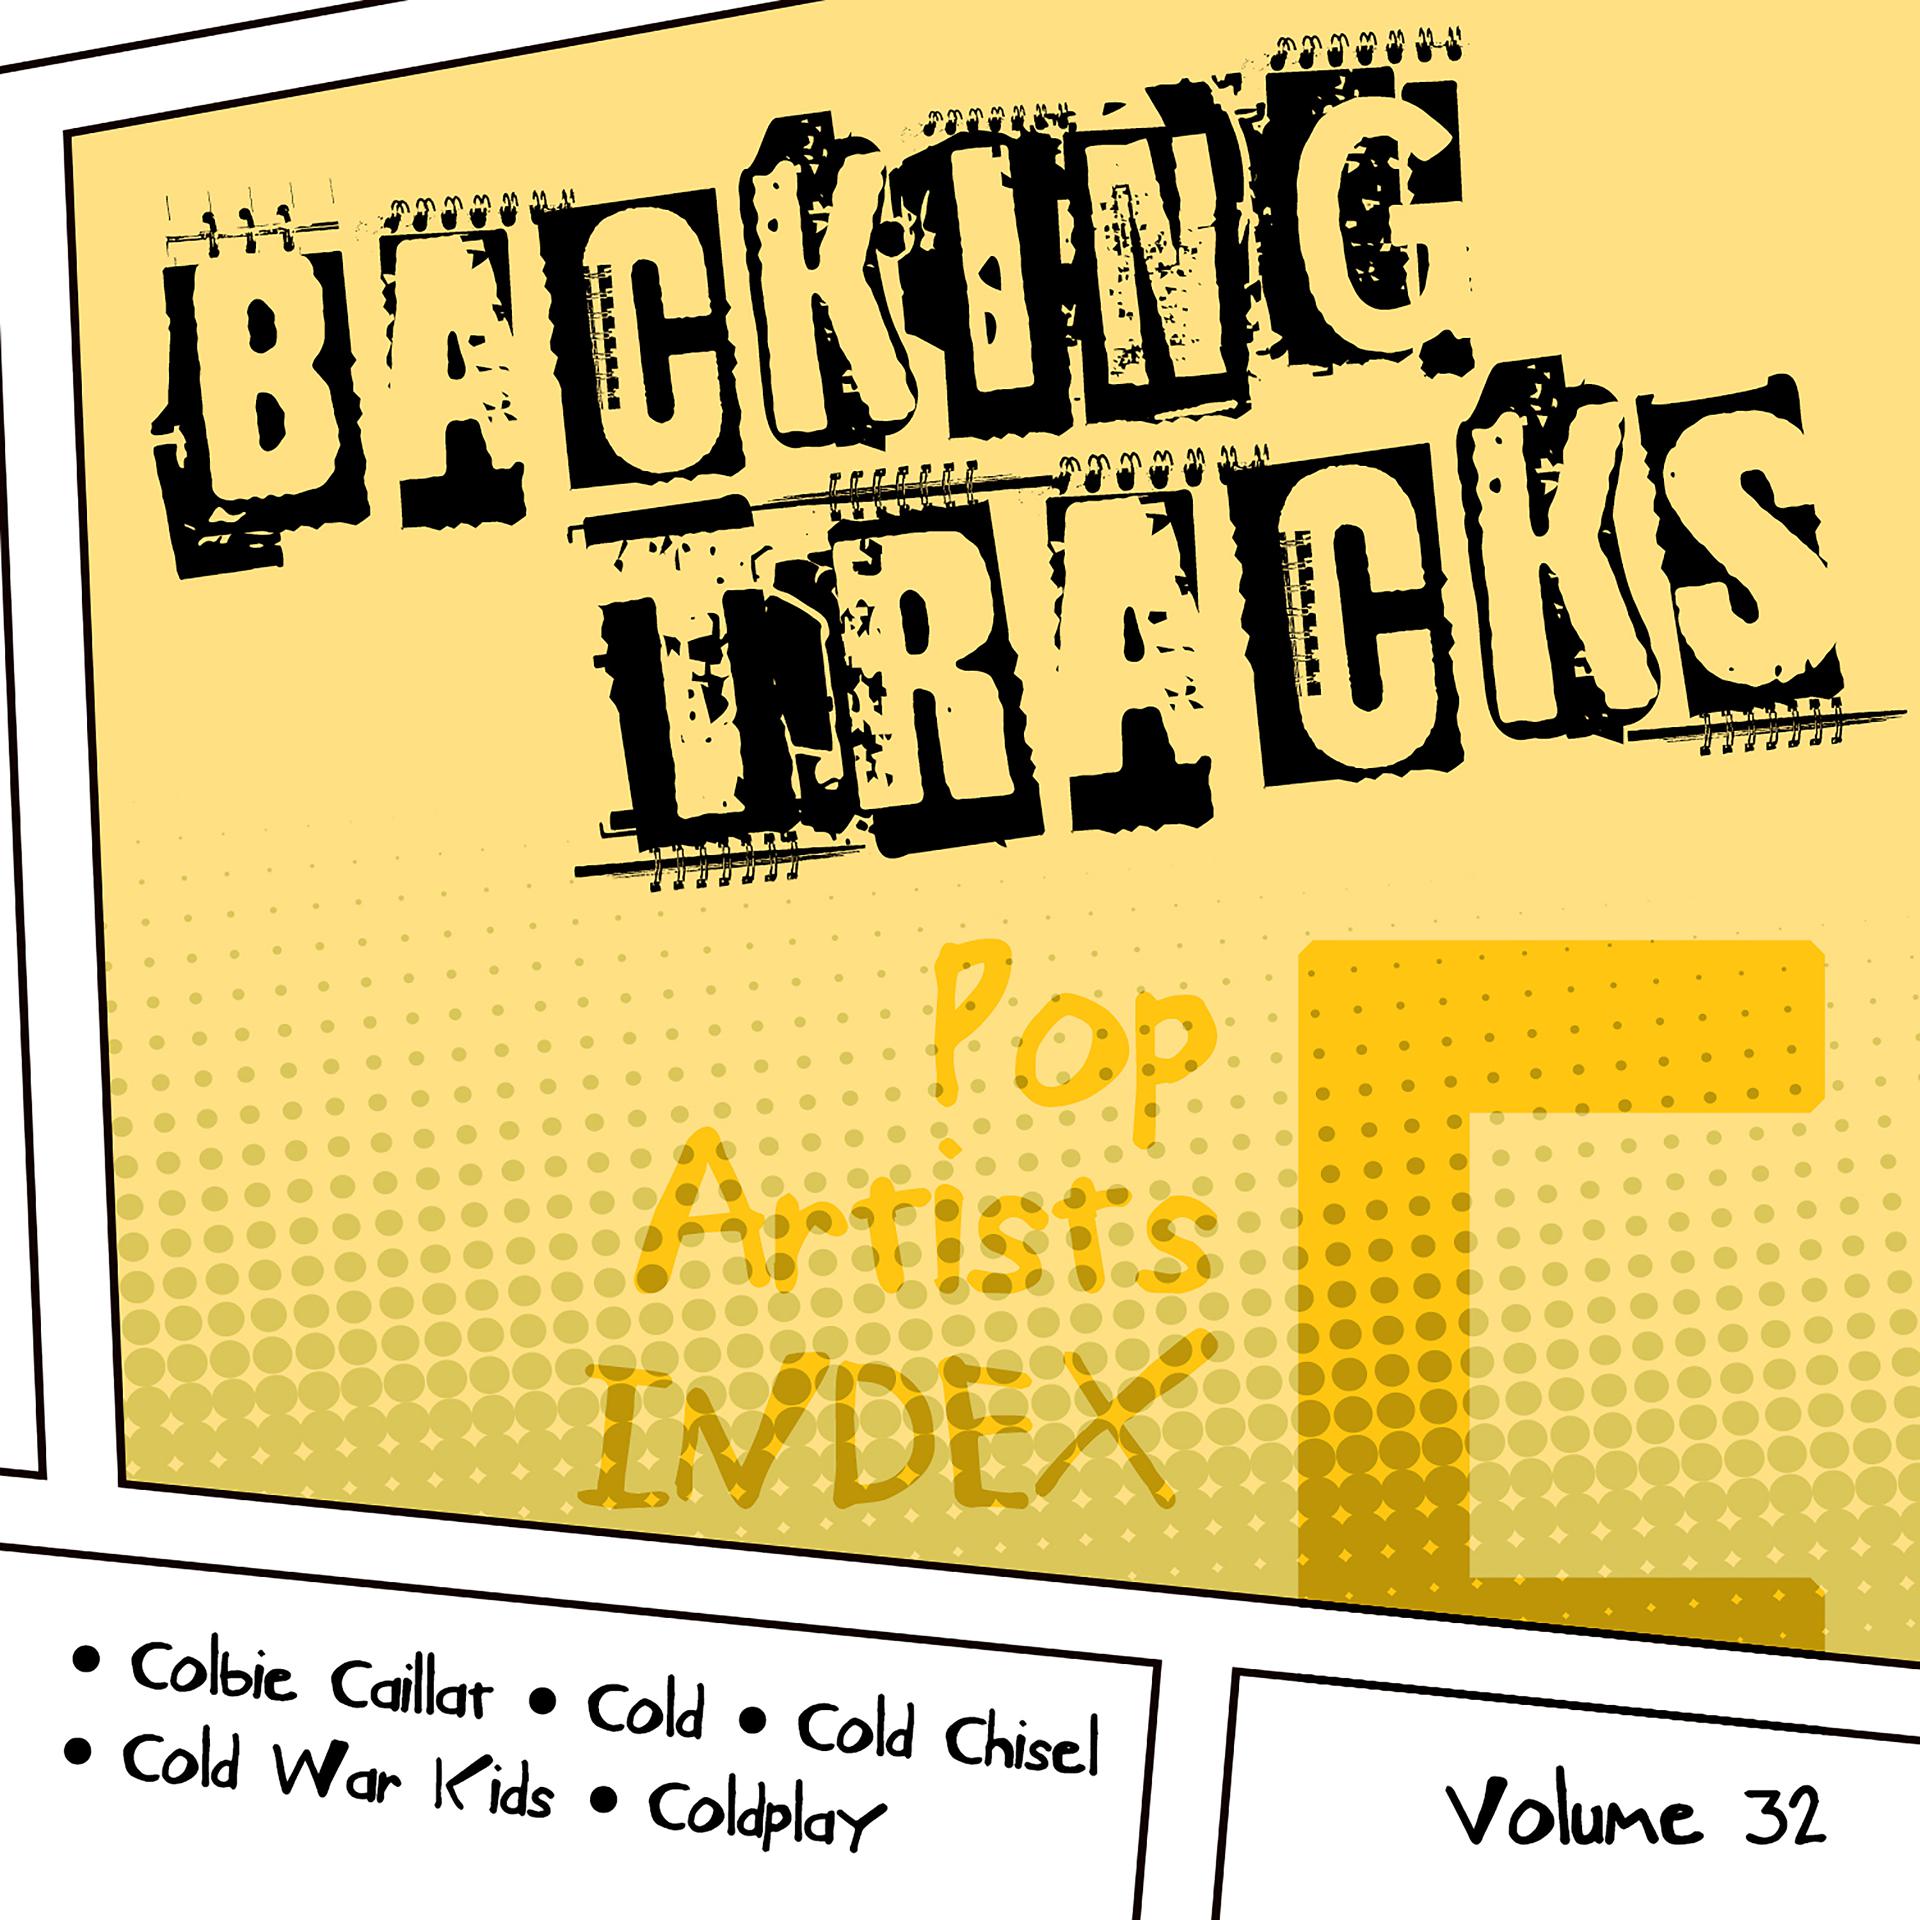 Постер альбома Backing Tracks / Pop Artists Index, C, (Colbie Caillat / Cold / Cold Chisel / Cold War Kids / Coldplay), Vol. 32